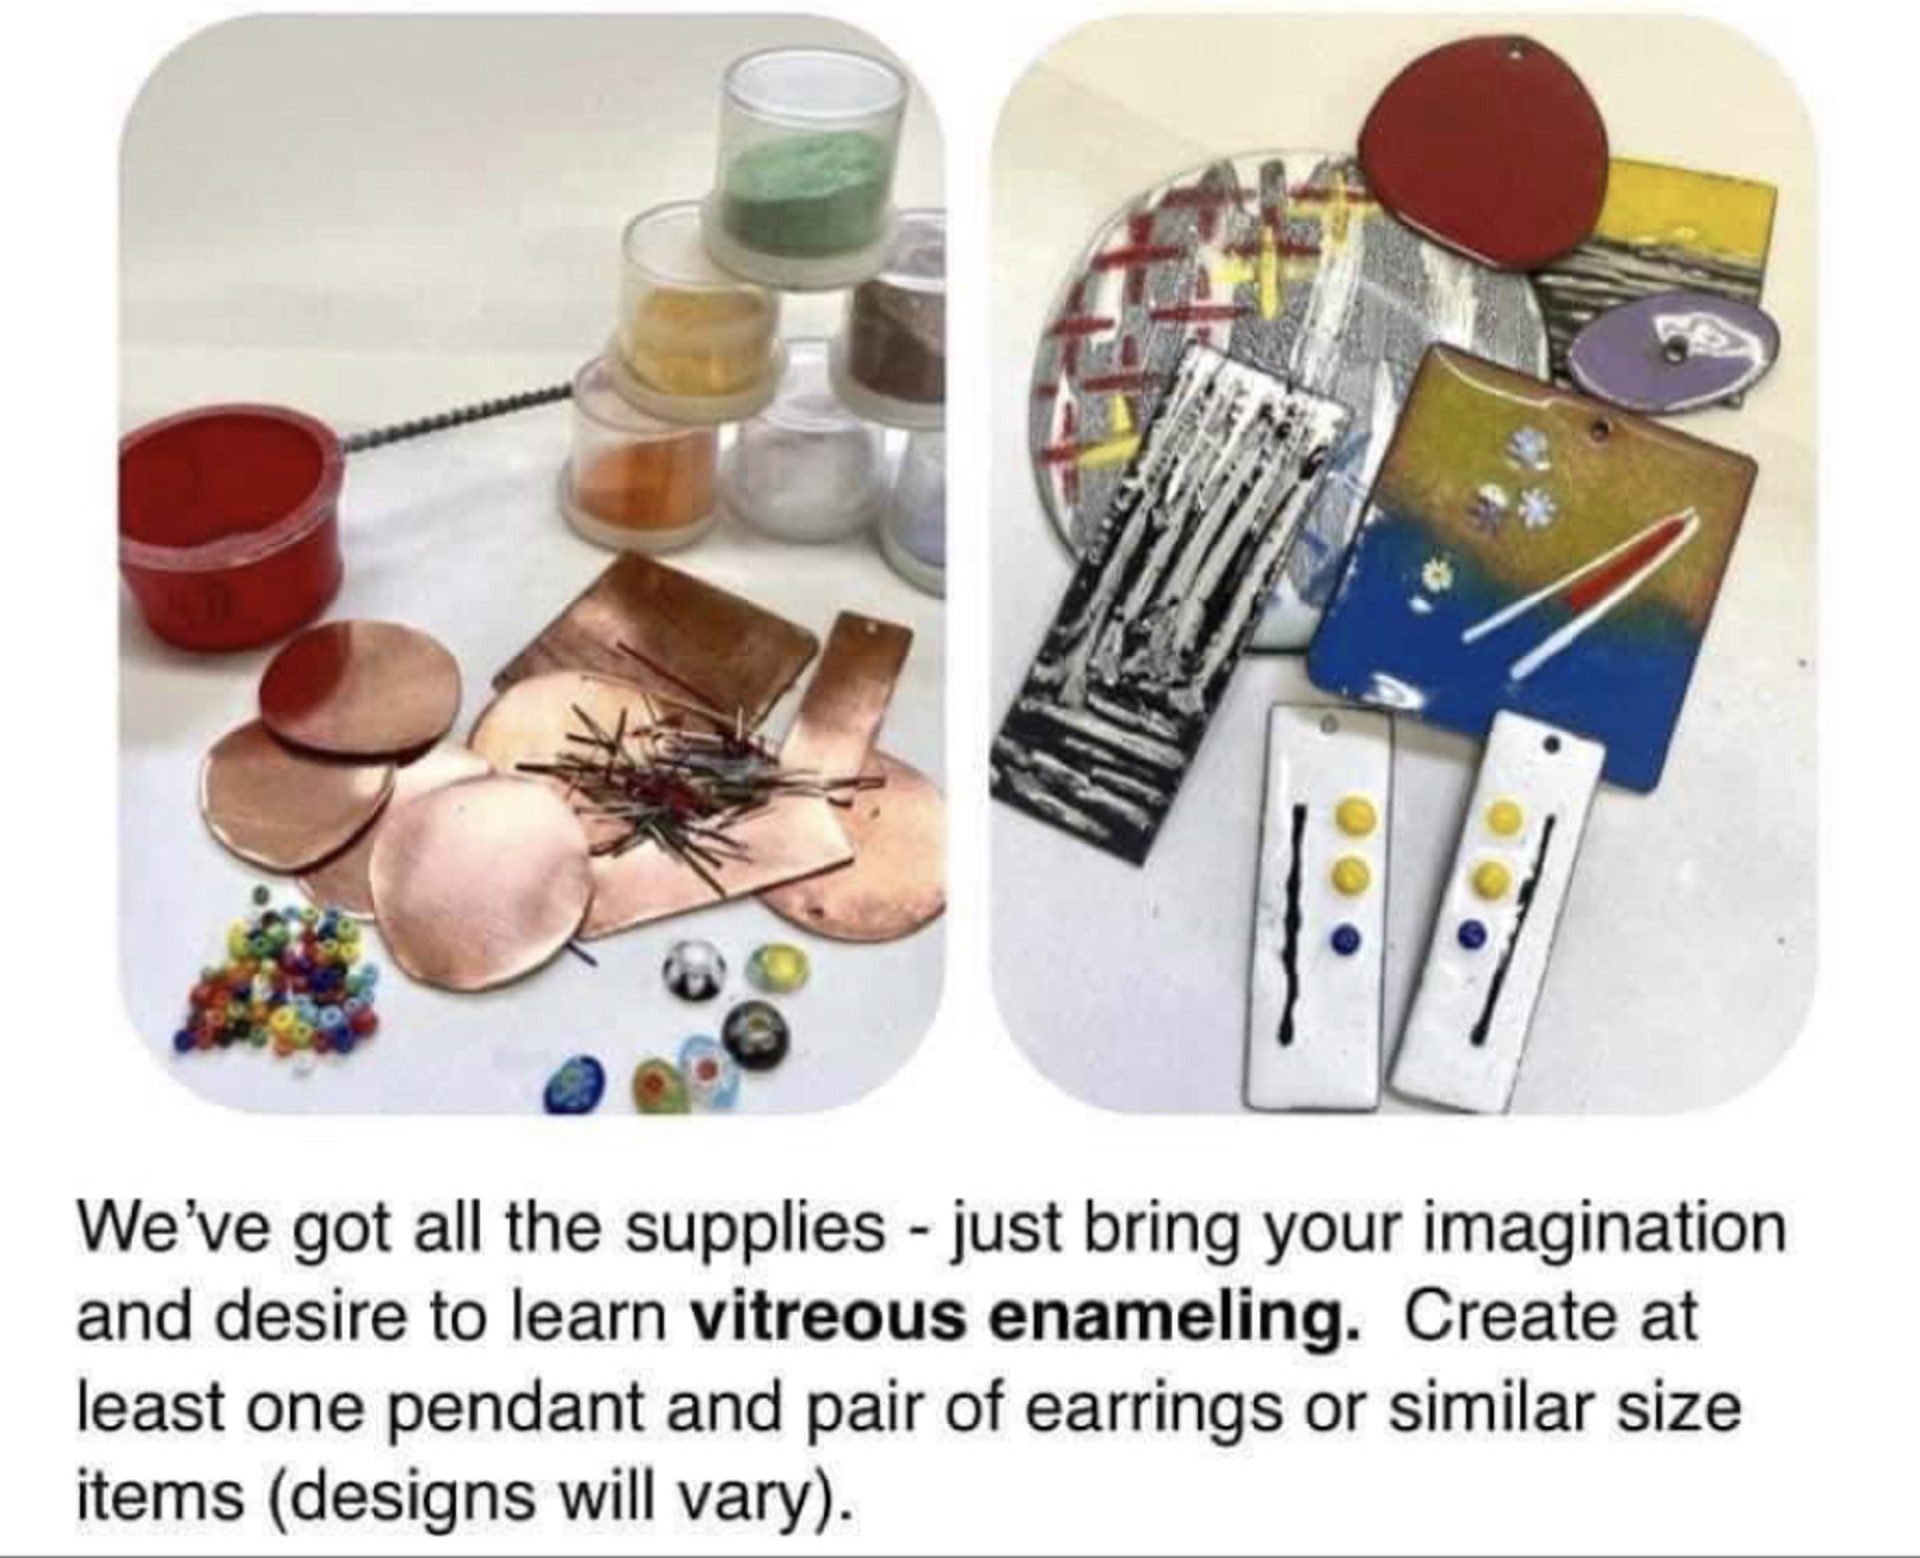 Vitreous Enameling Workshop 9 AM-12 PM by Cathy Talbot